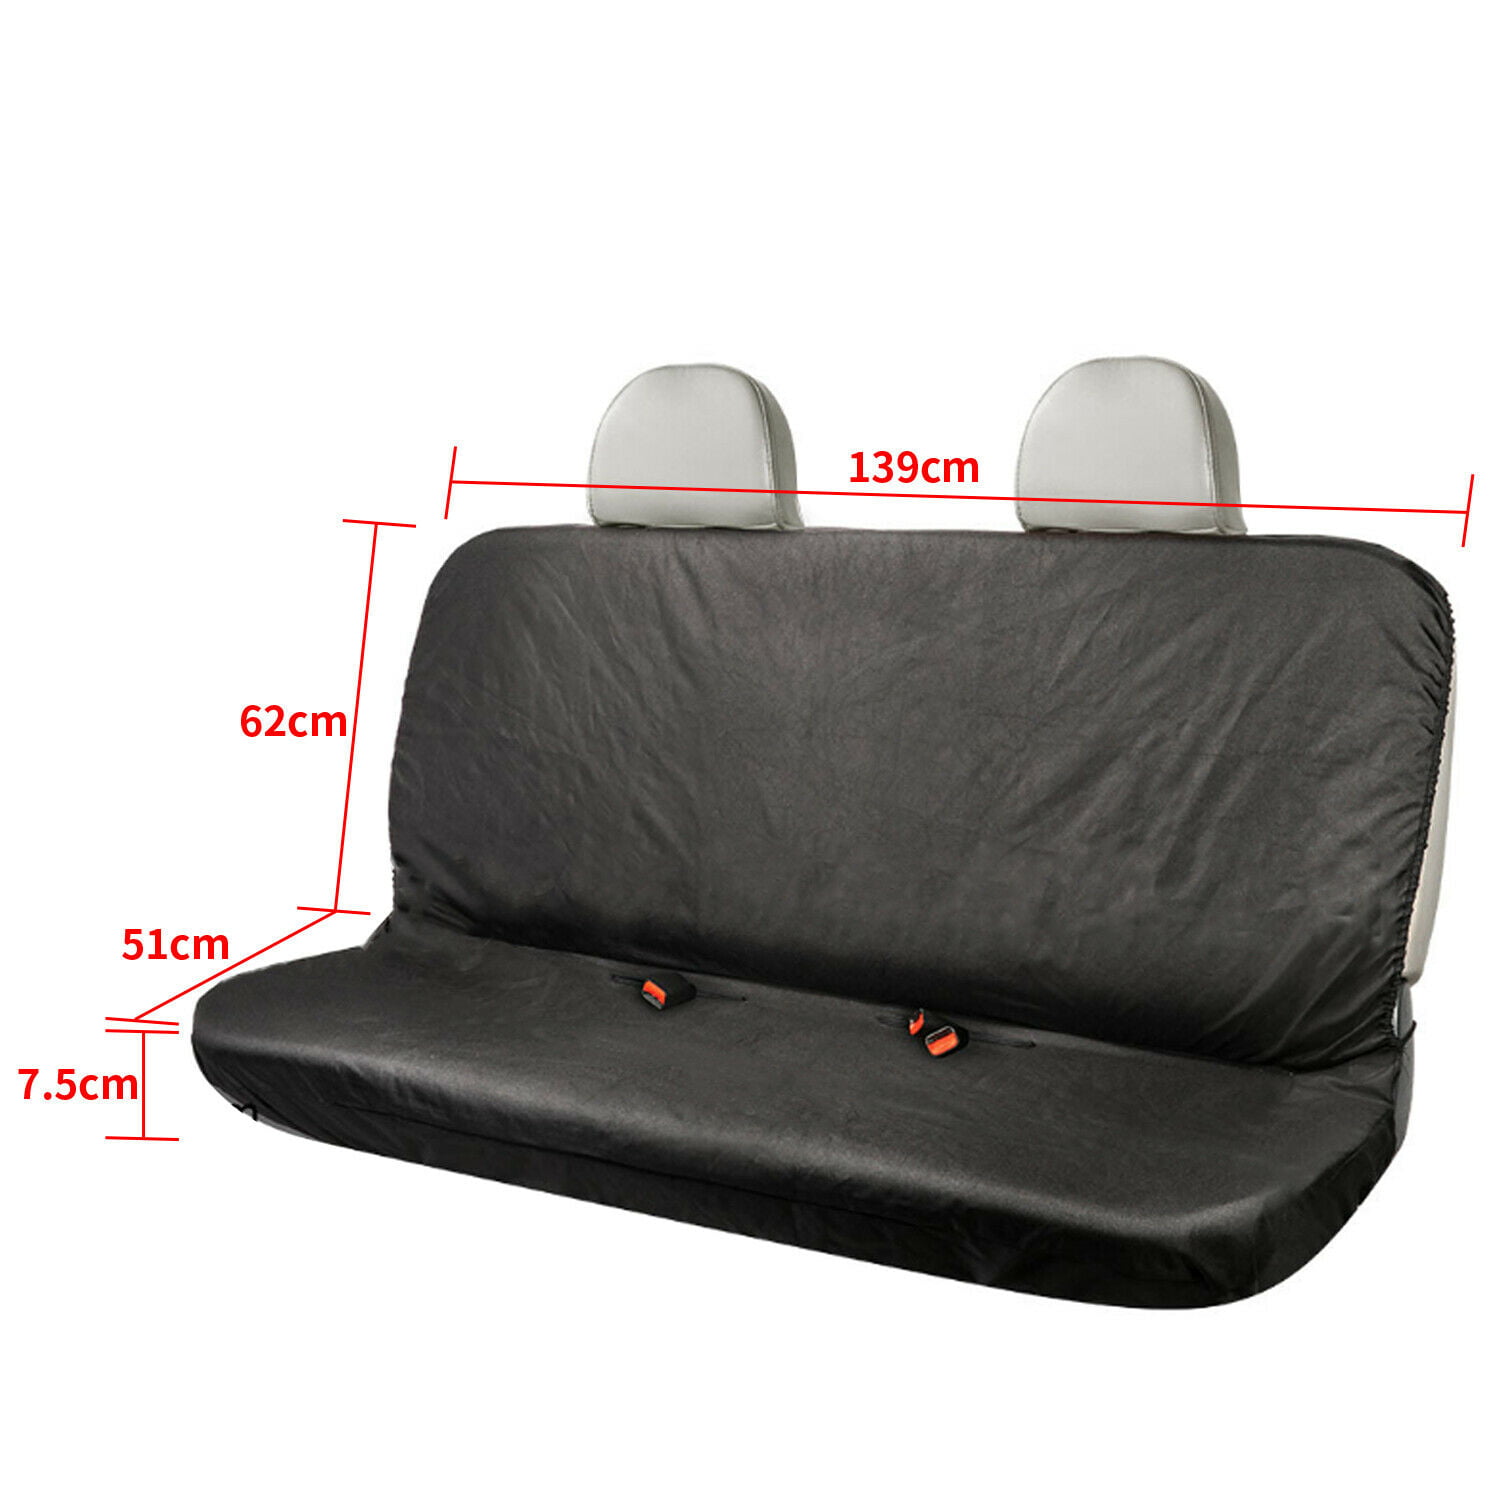 Car Cushion Seat Protector Universal Orthopedic Padded Massage Back PLASTIFIC Van Taxi Car Black Seat Protector Cover Car Accessories Dog Car Seat Cover 